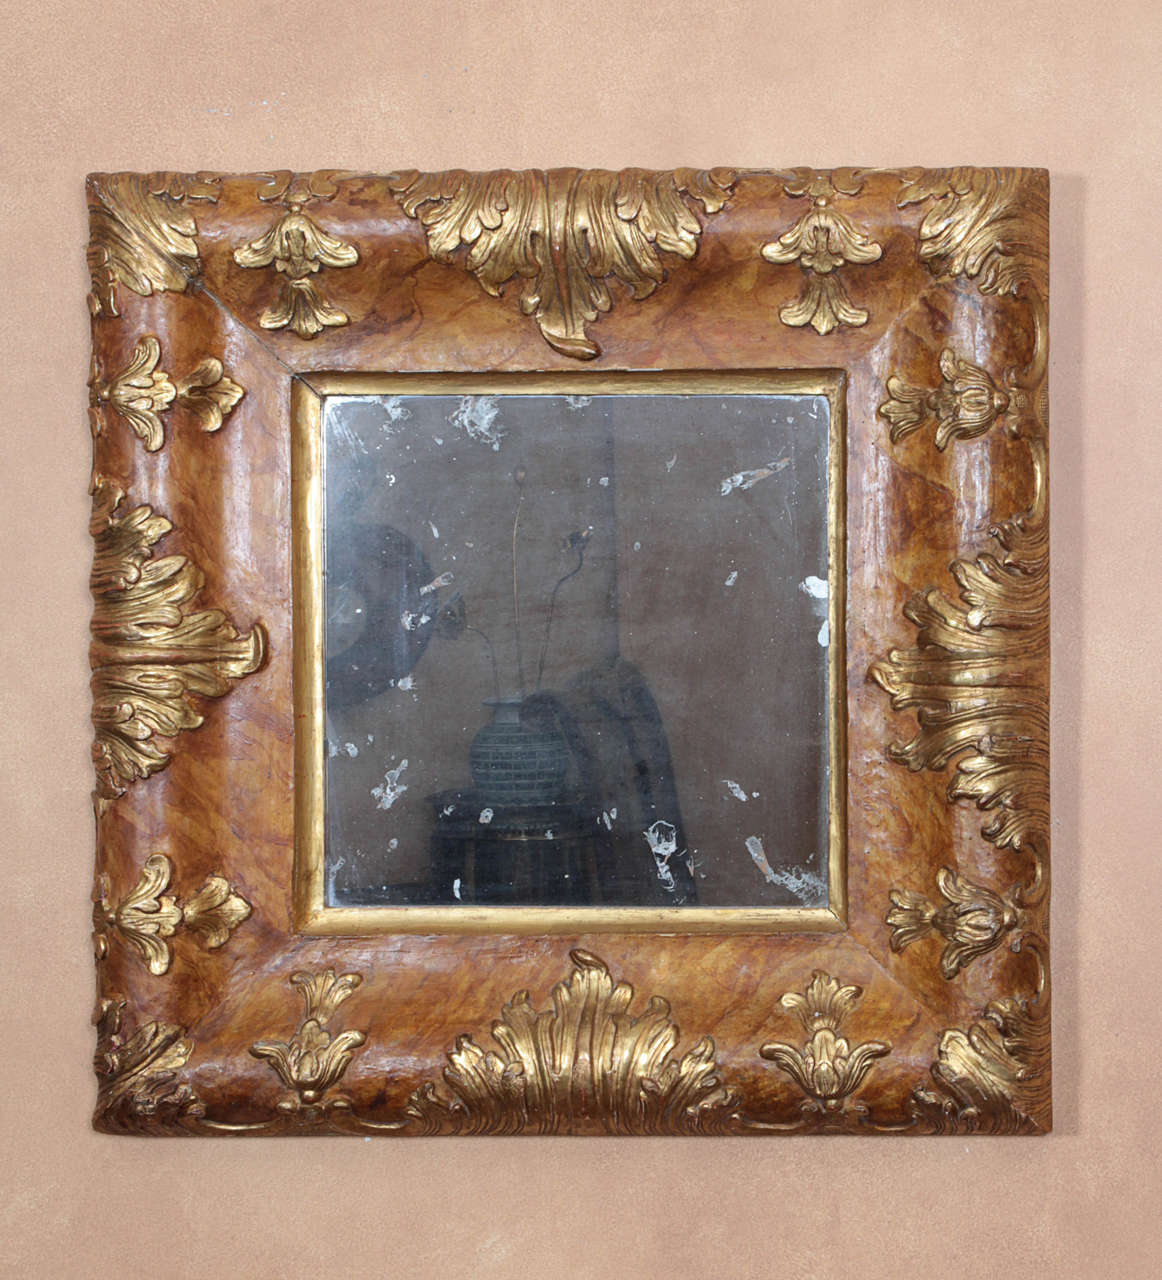 A faux-marble painted and gilded-wood Rococo mirror with a period mirror plate. Possibly made in Eastern Europe.